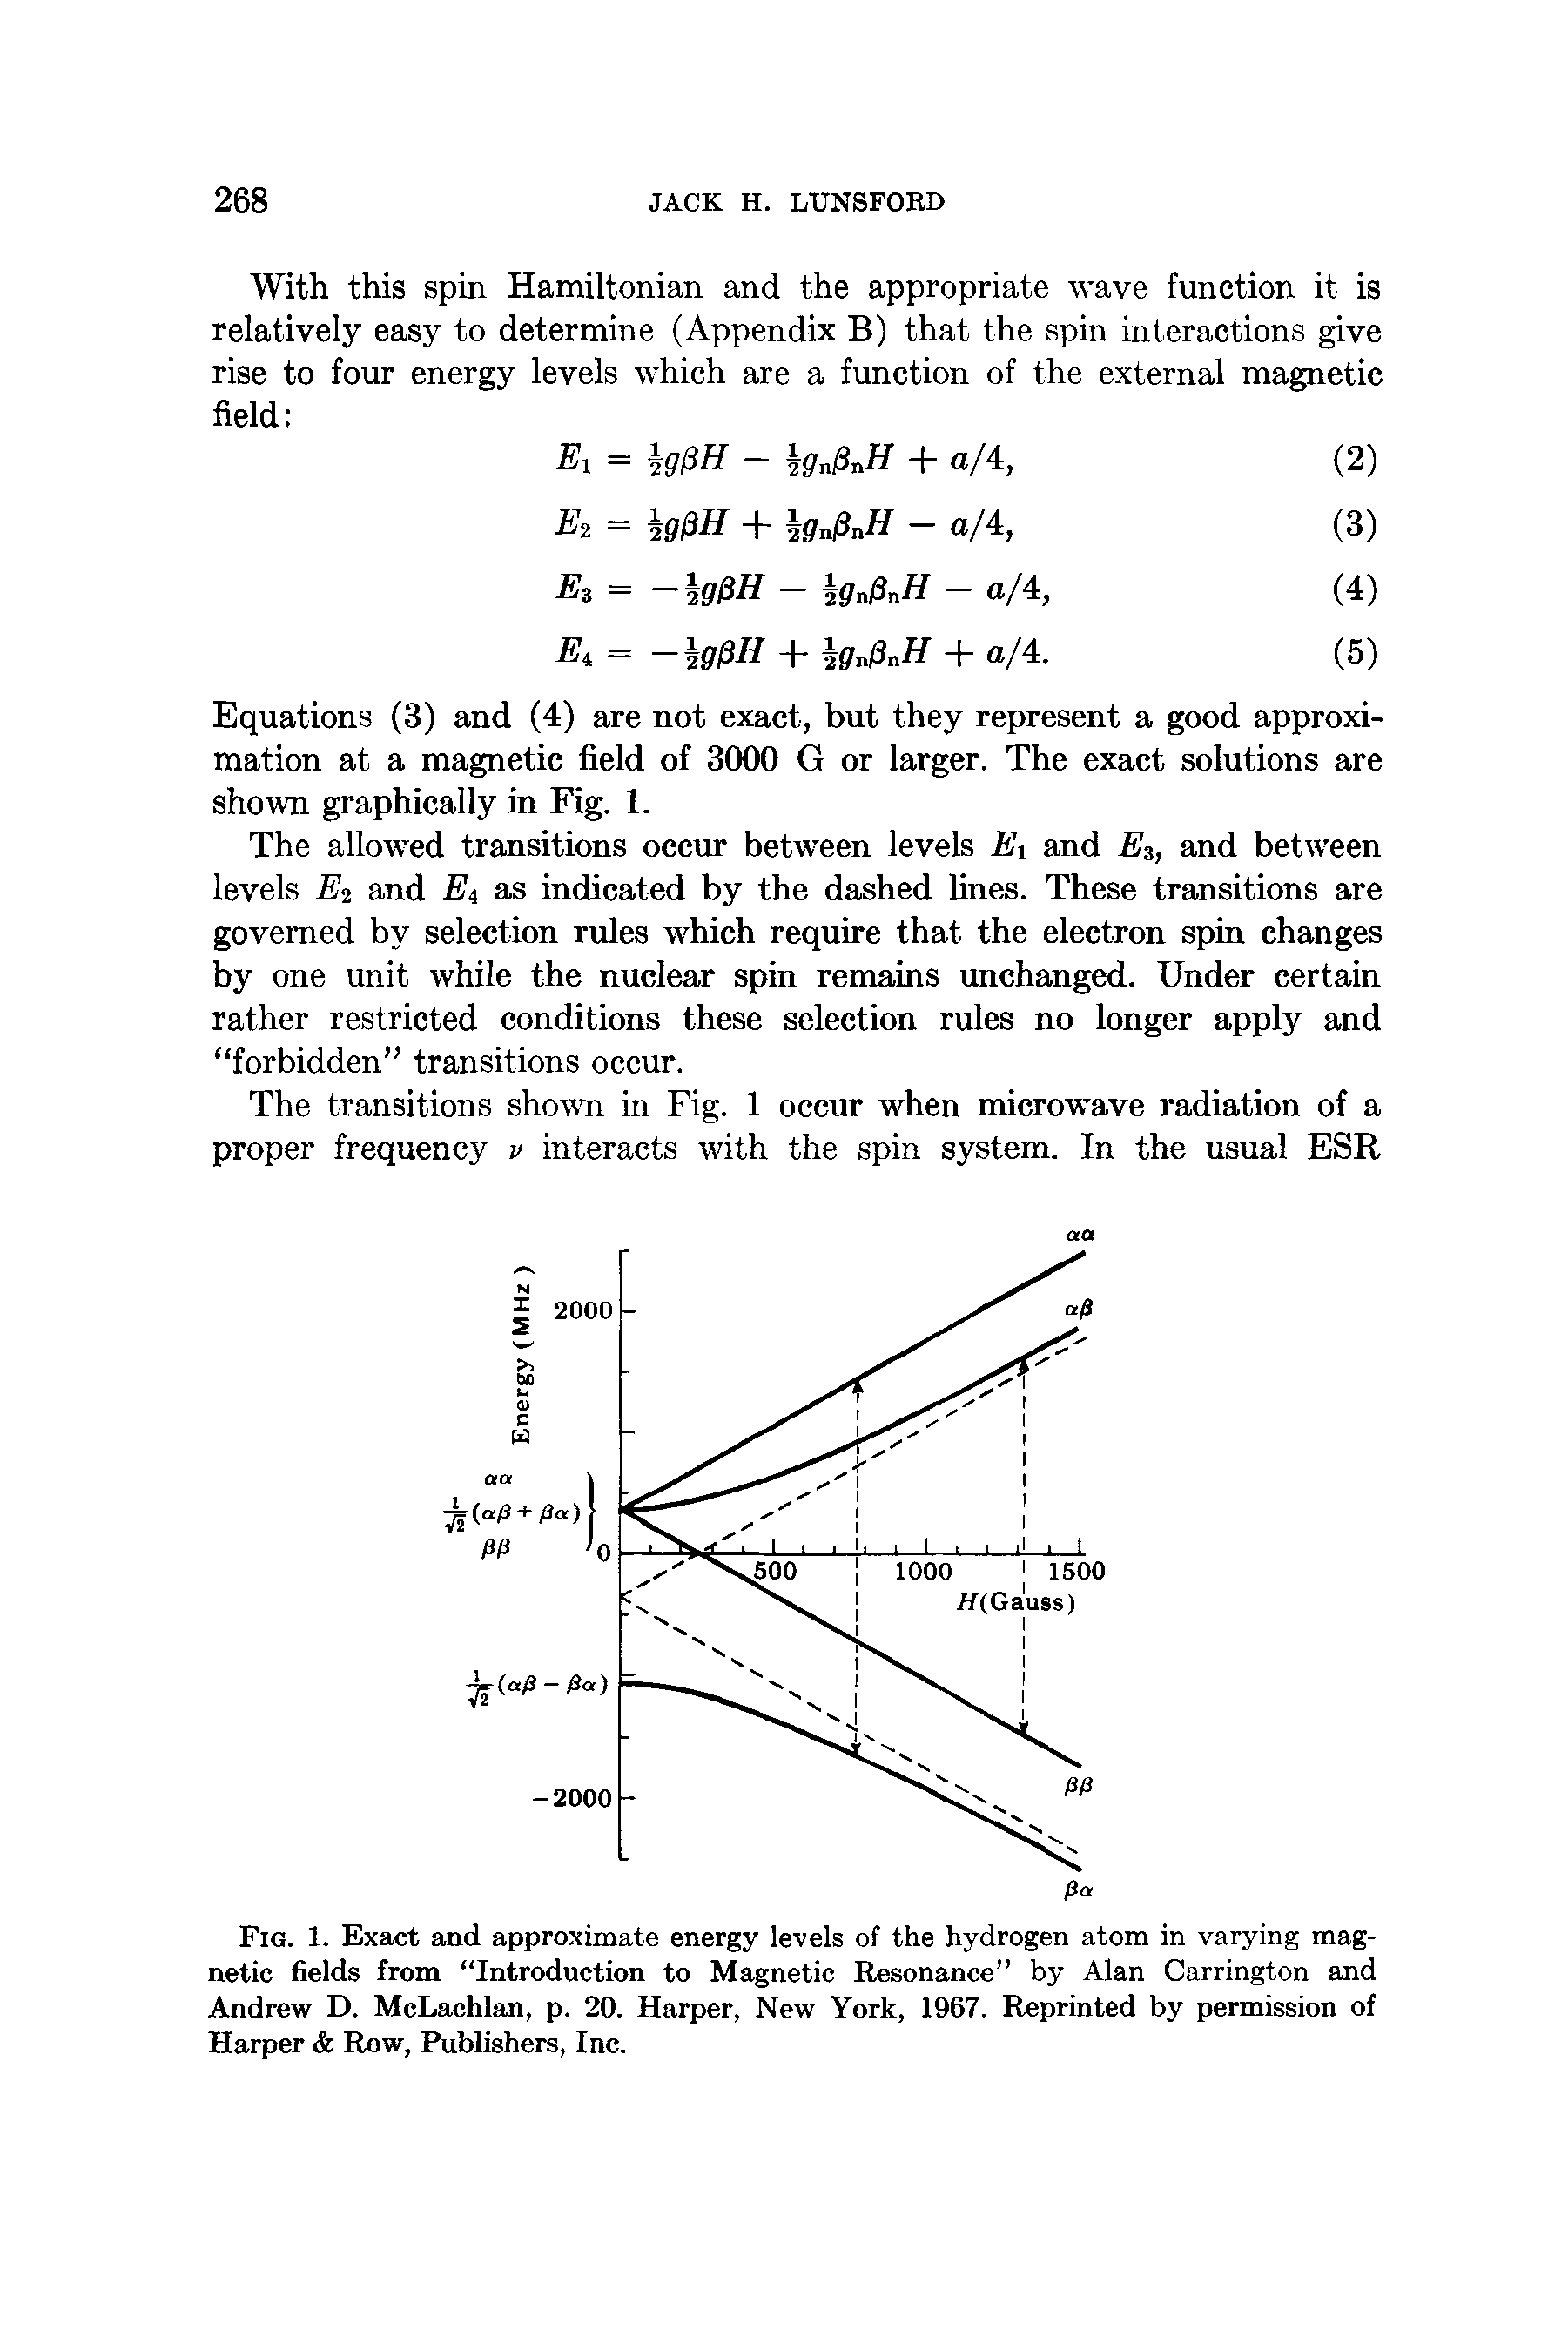 Fig. 1. Exact and approximate energy levels of the hydrogen atom in varying magnetic fields from Introduction to Magnetic Resonance by Alan Carrington and Andrew D. McLachlan, p. 20. Harper, New York, 1967. Reprinted by permission of Harper Row, Publishers, Inc.